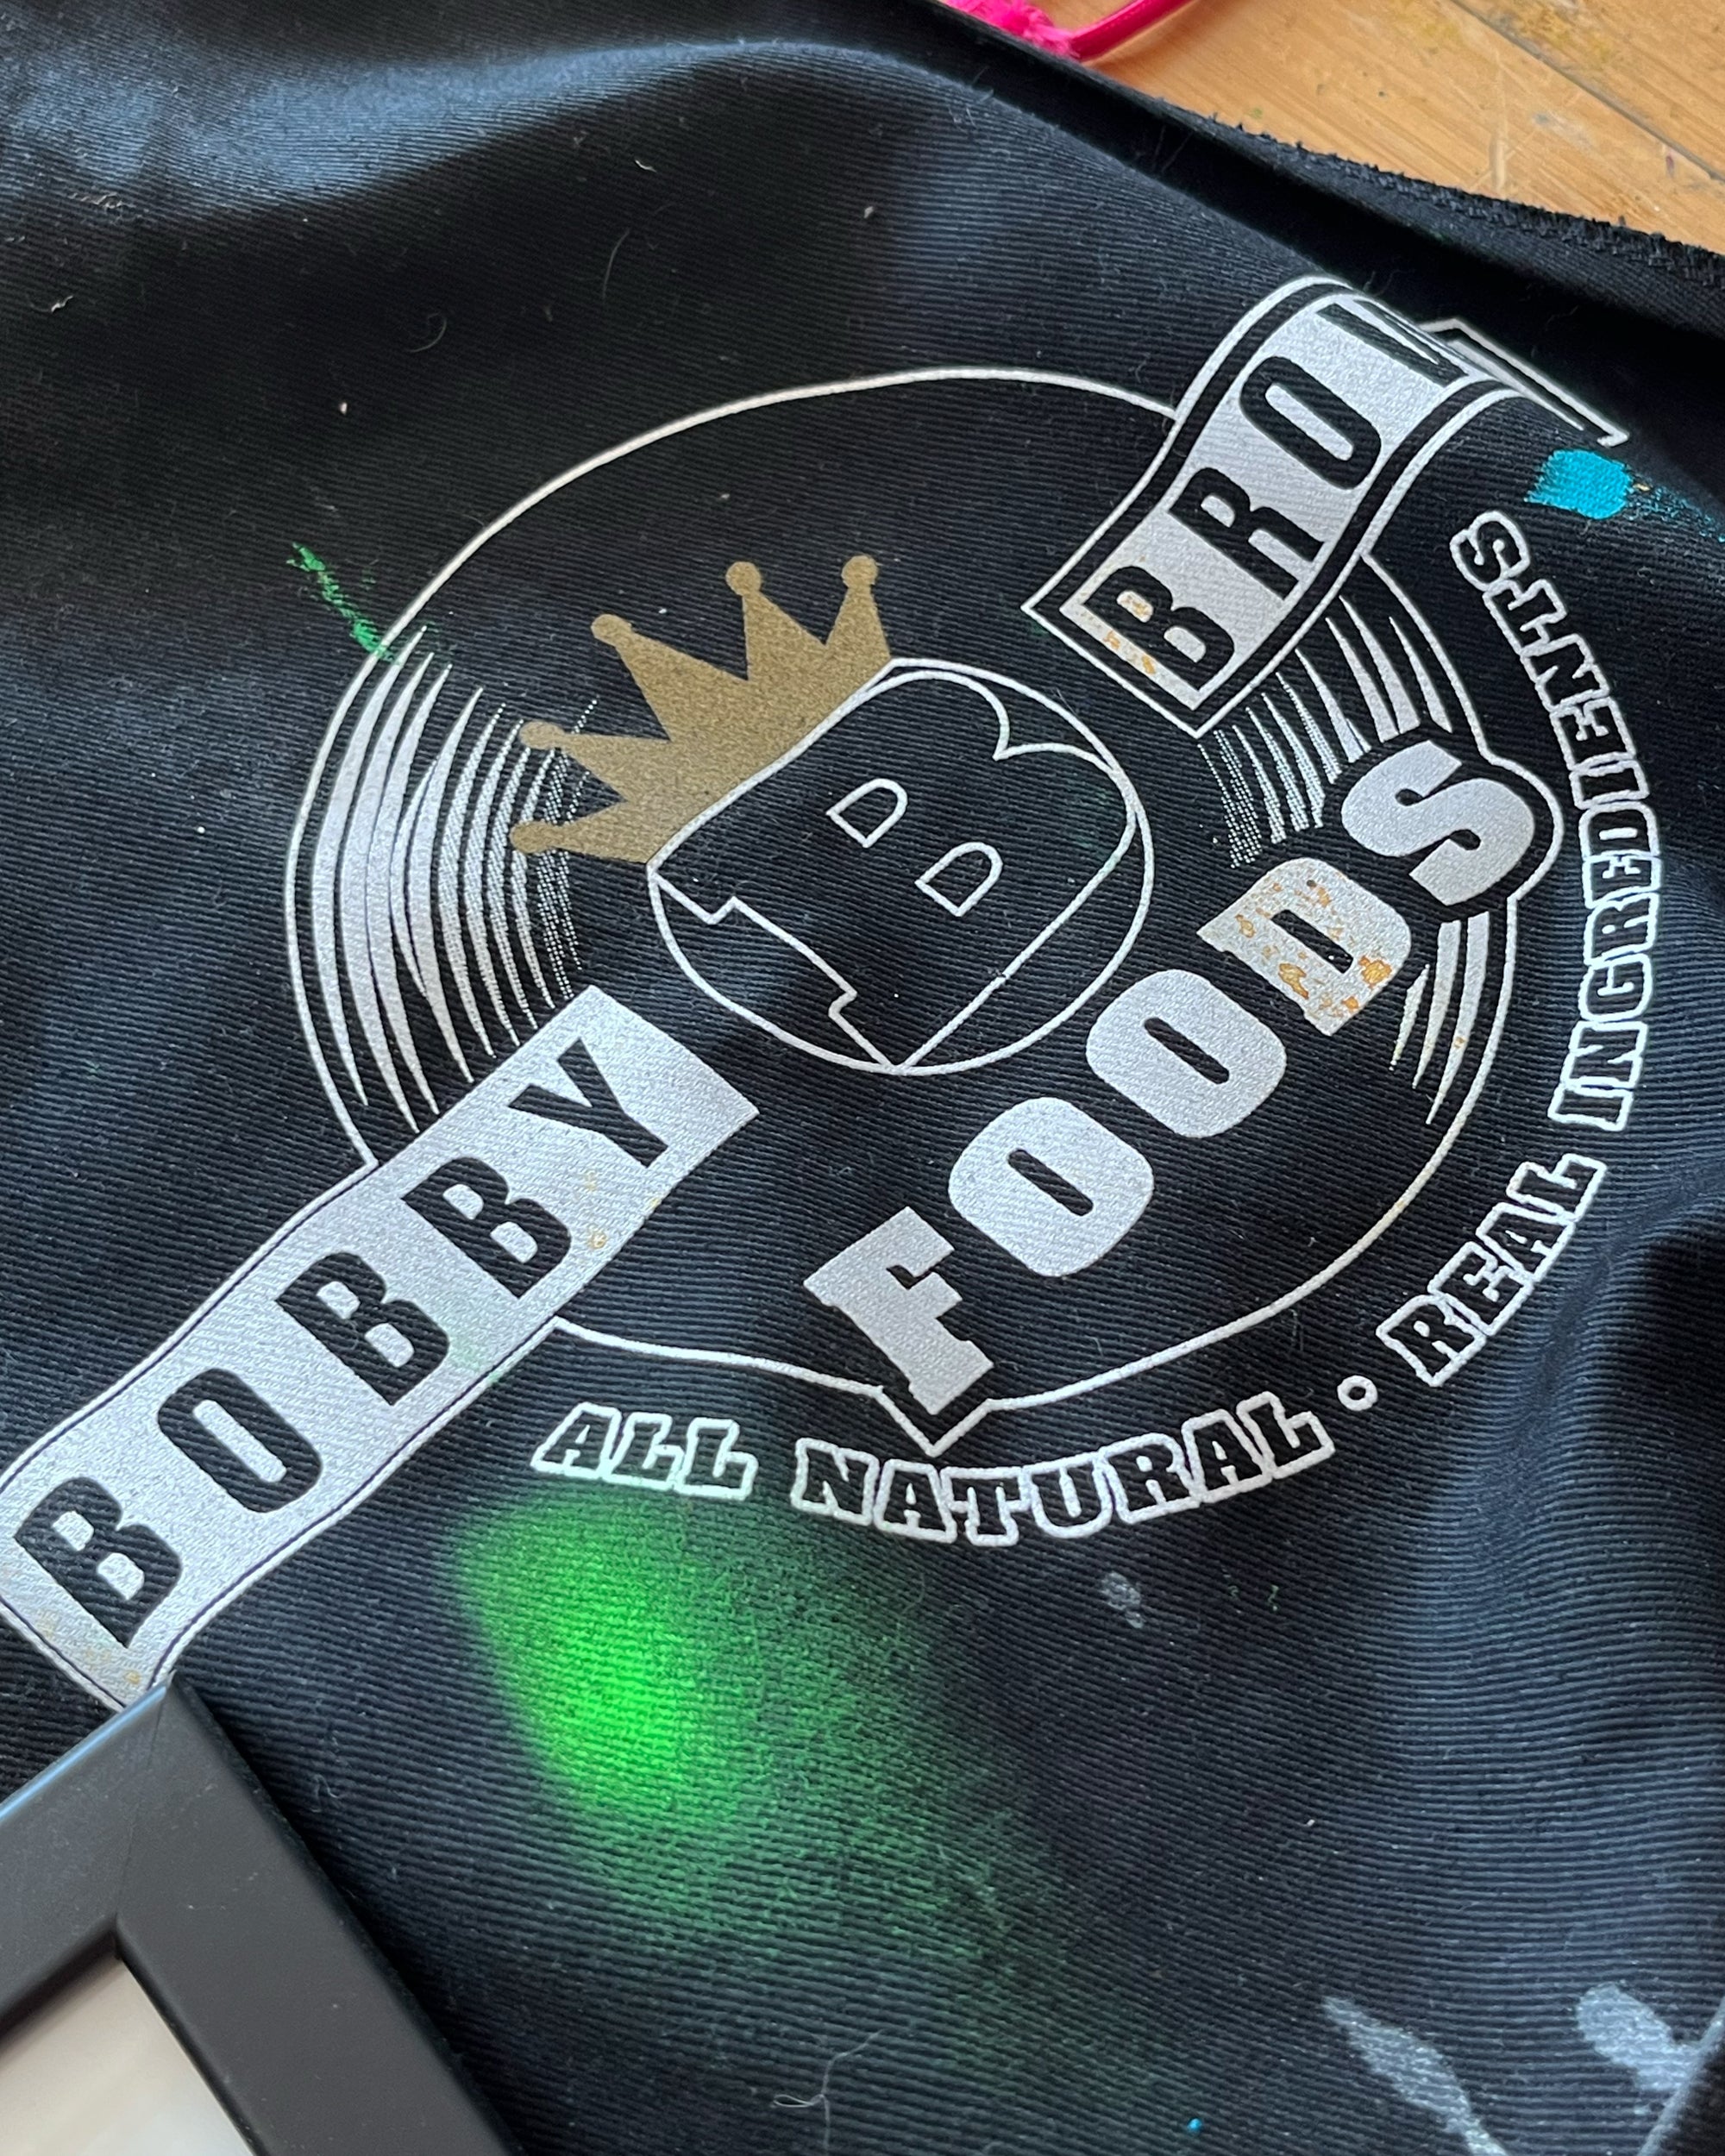 BOBBY BROWN FOODS w/ SIGNED HEAD SHOT